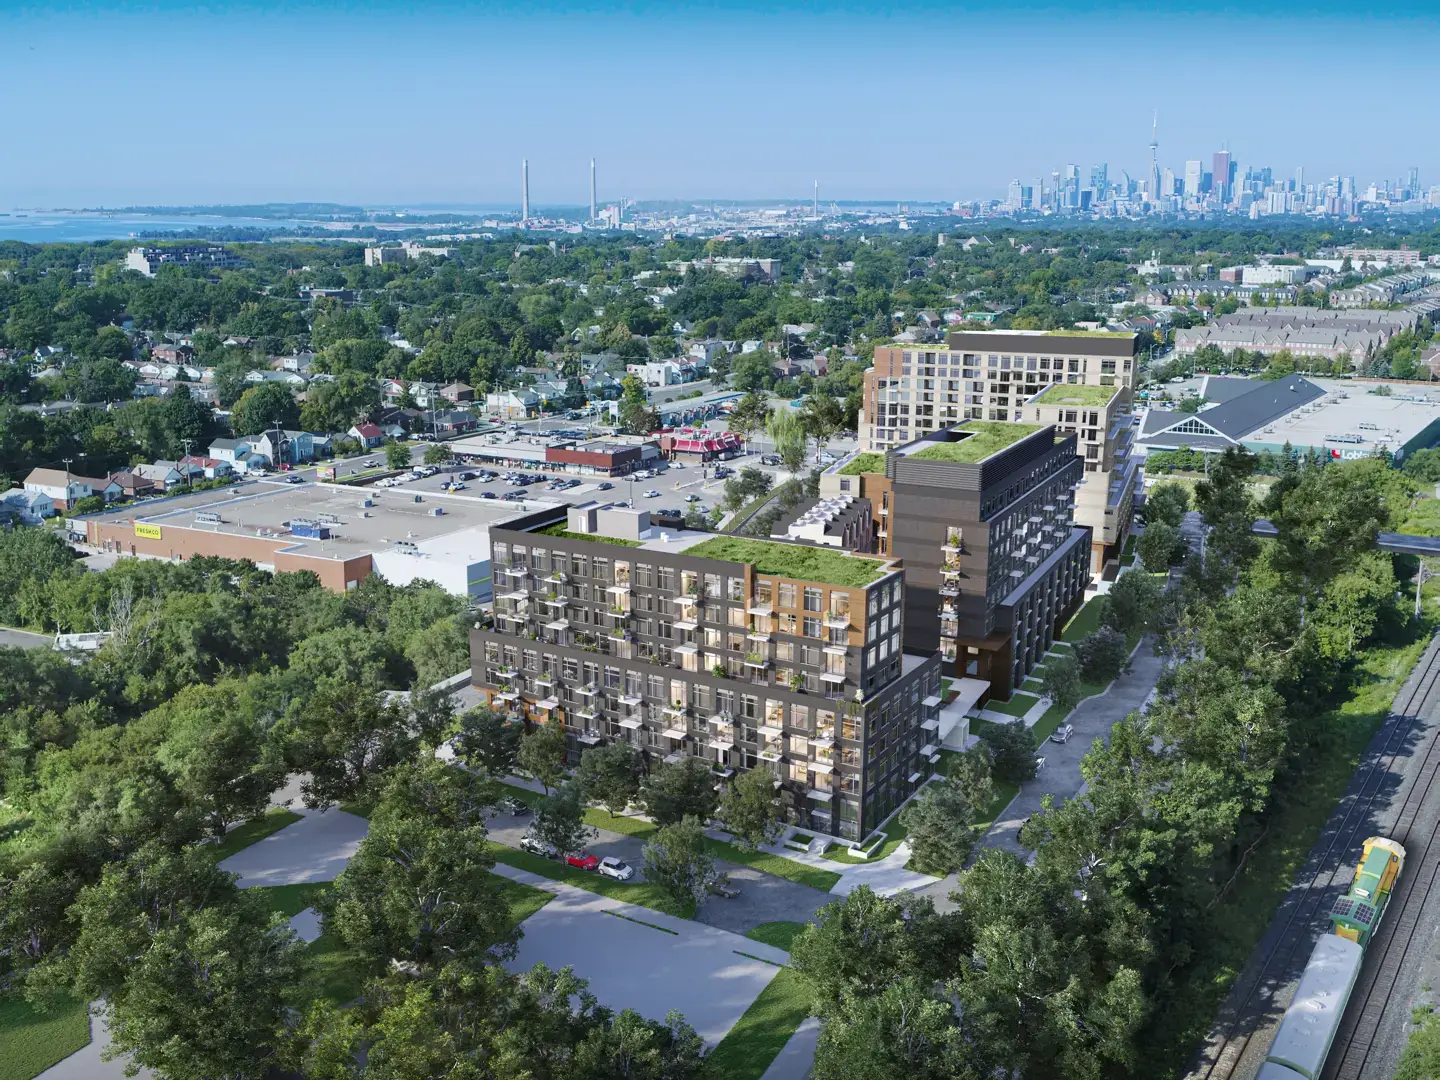 Rendering of Birchley Park Condos and Towns aerial close up